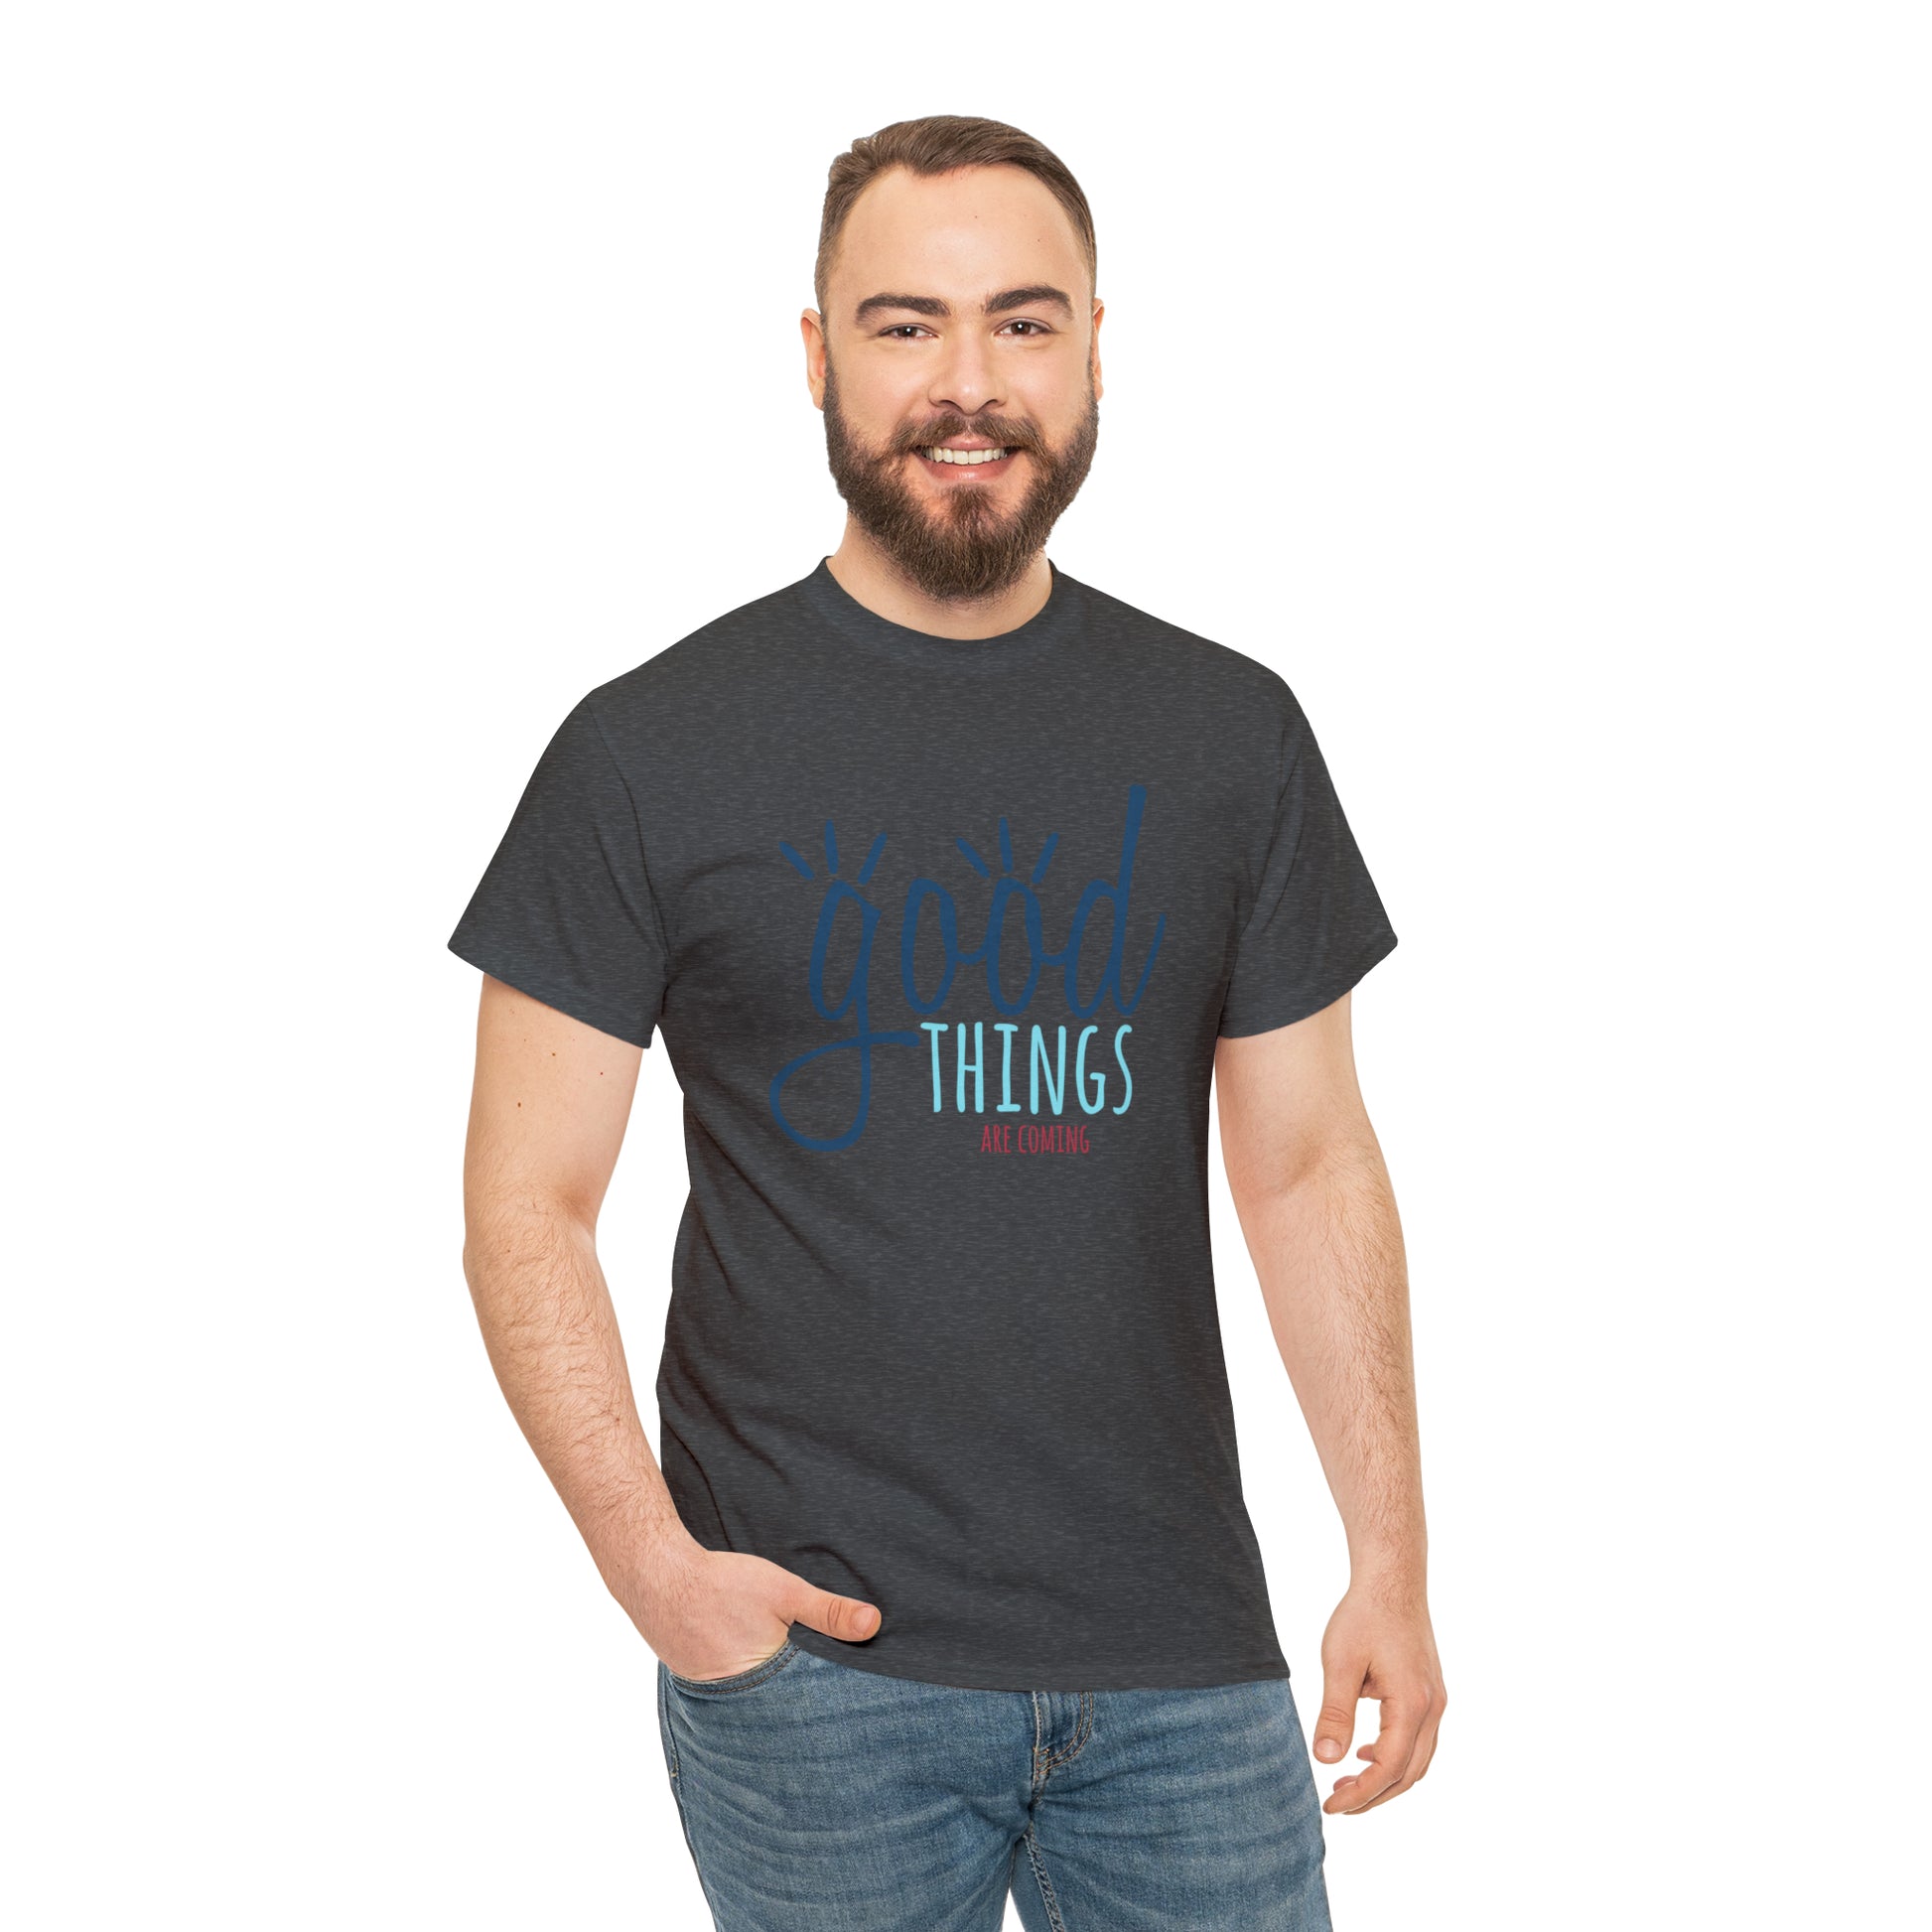 "Good Things Are Coming" T-Shirt - Weave Got Gifts - Unique Gifts You Won’t Find Anywhere Else!